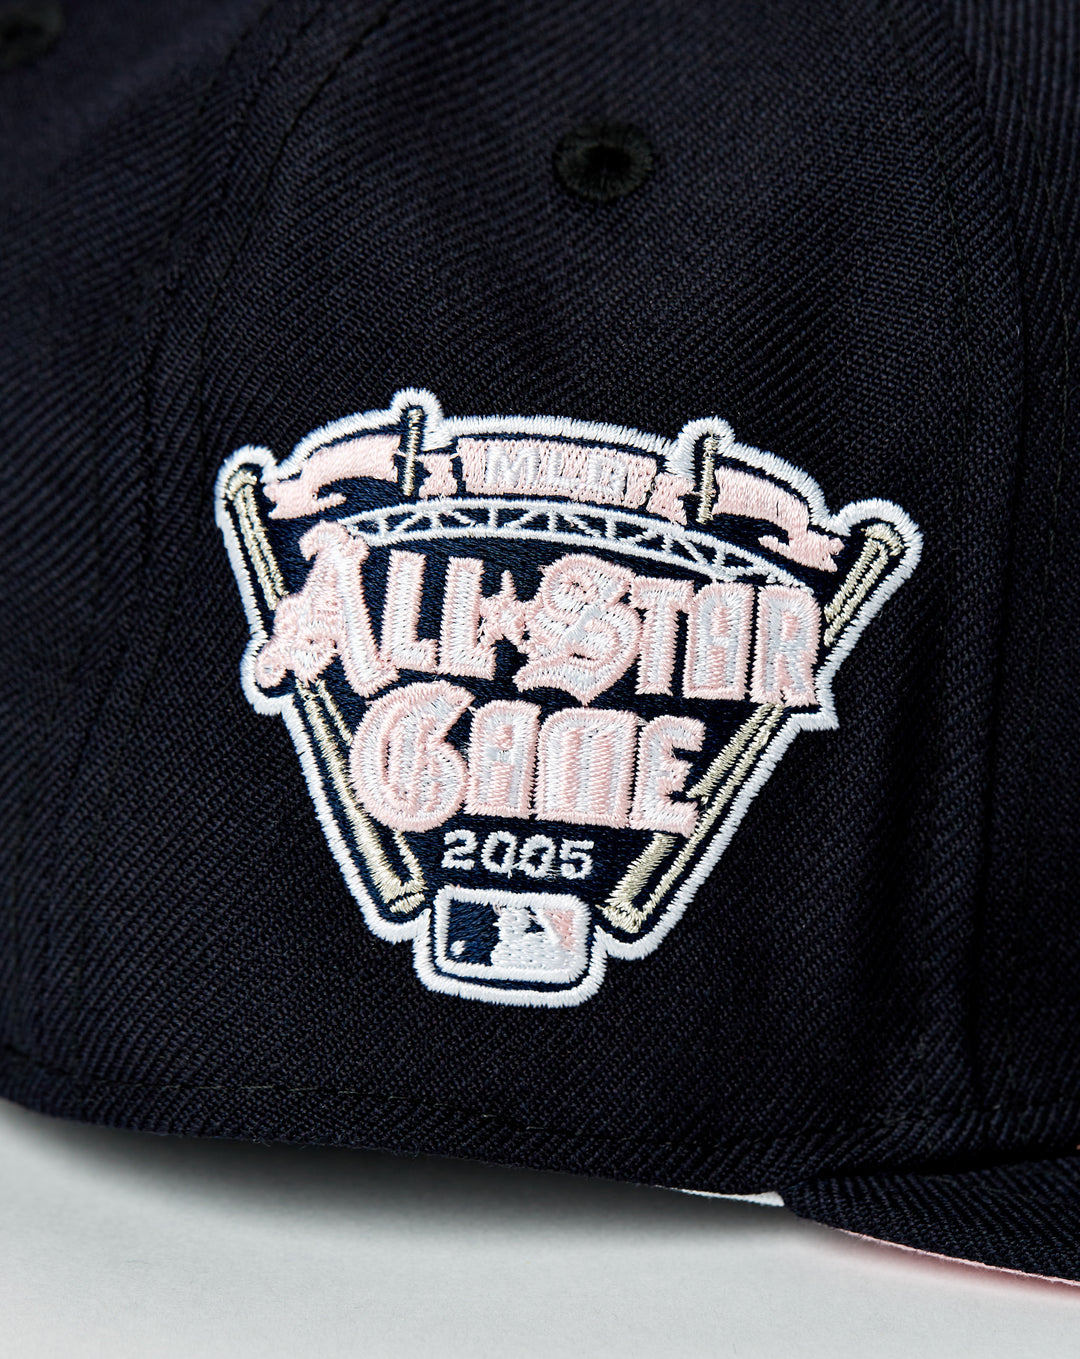 Detroit Tigers 59Fifty